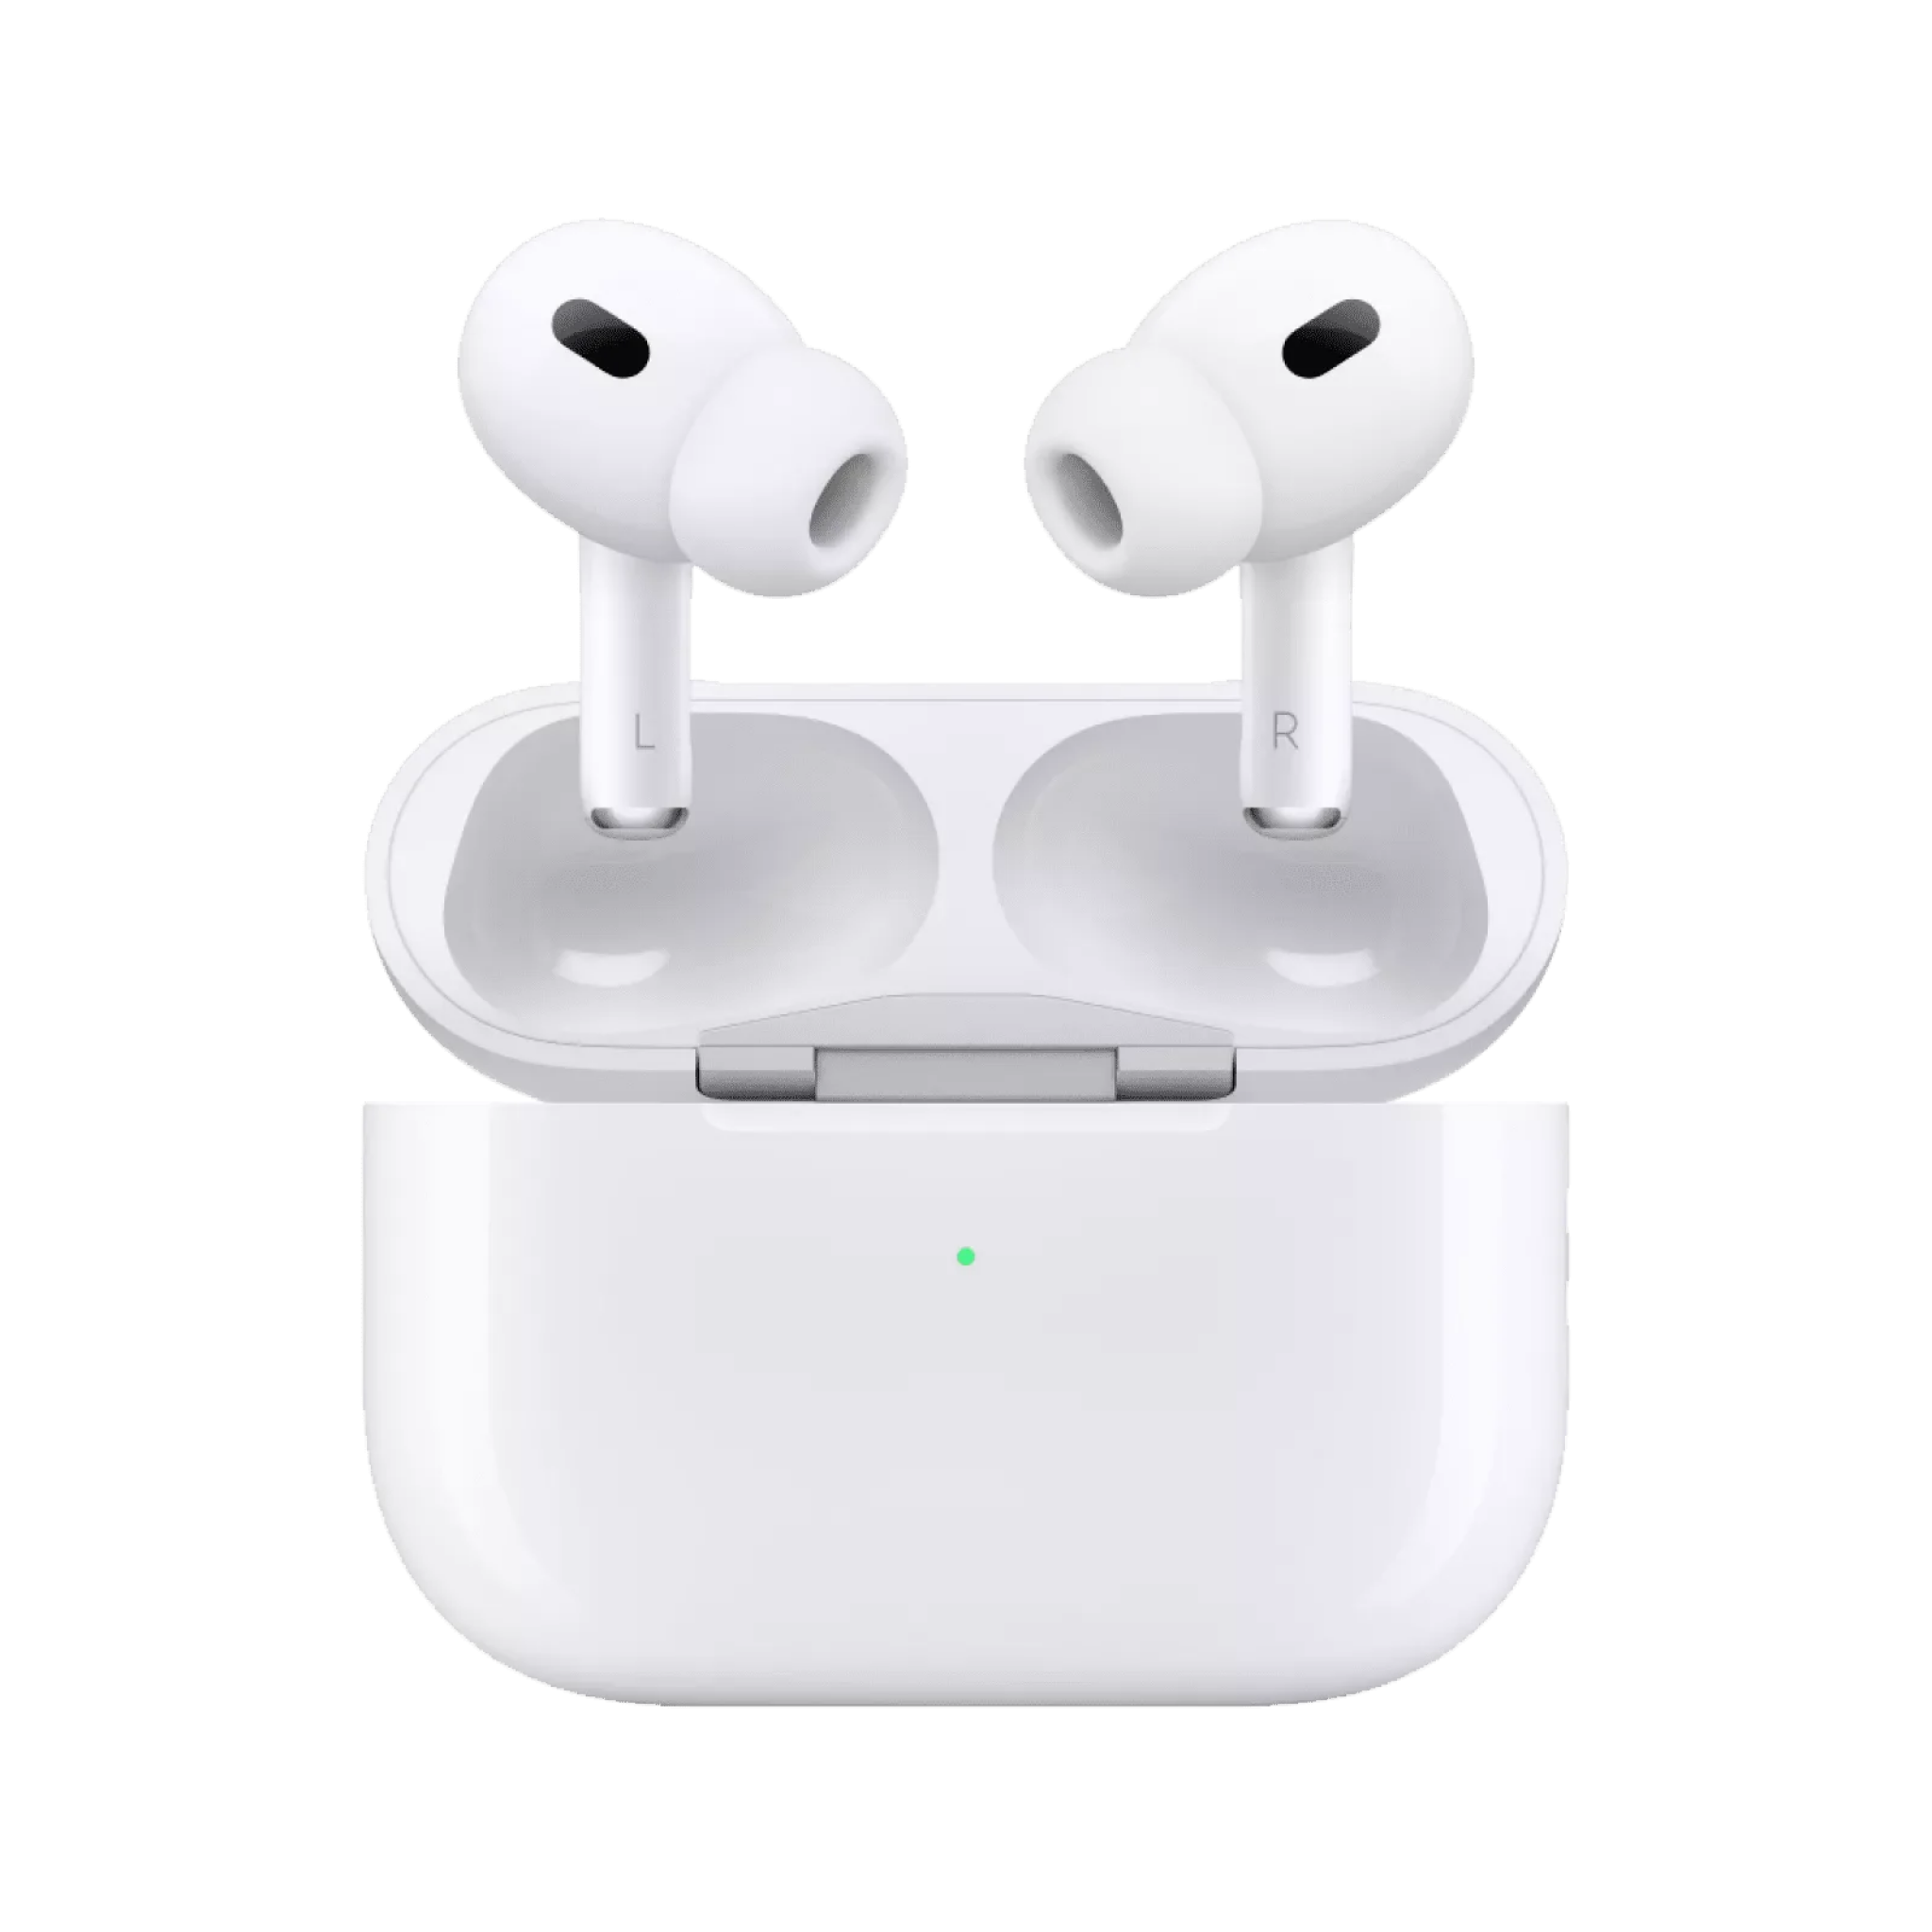 2022-Apple-AirPods-Pro-2nd-Generation-with-MagSafe-Charging-Case.png